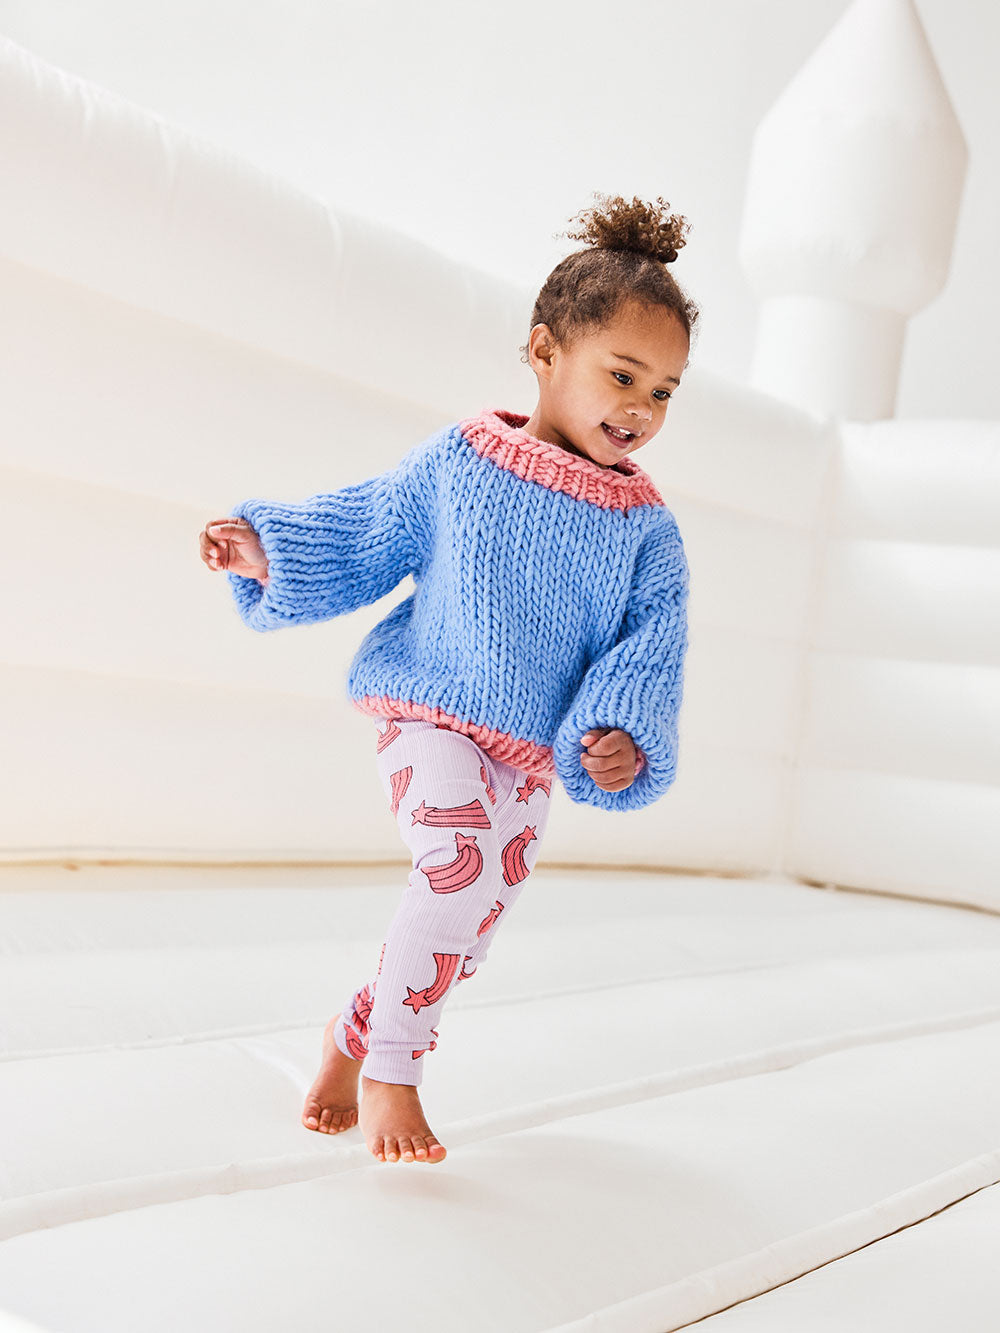 Little girls runs on white jumping castle wearing a pink and blue chunky knitted jumper and purple leggings